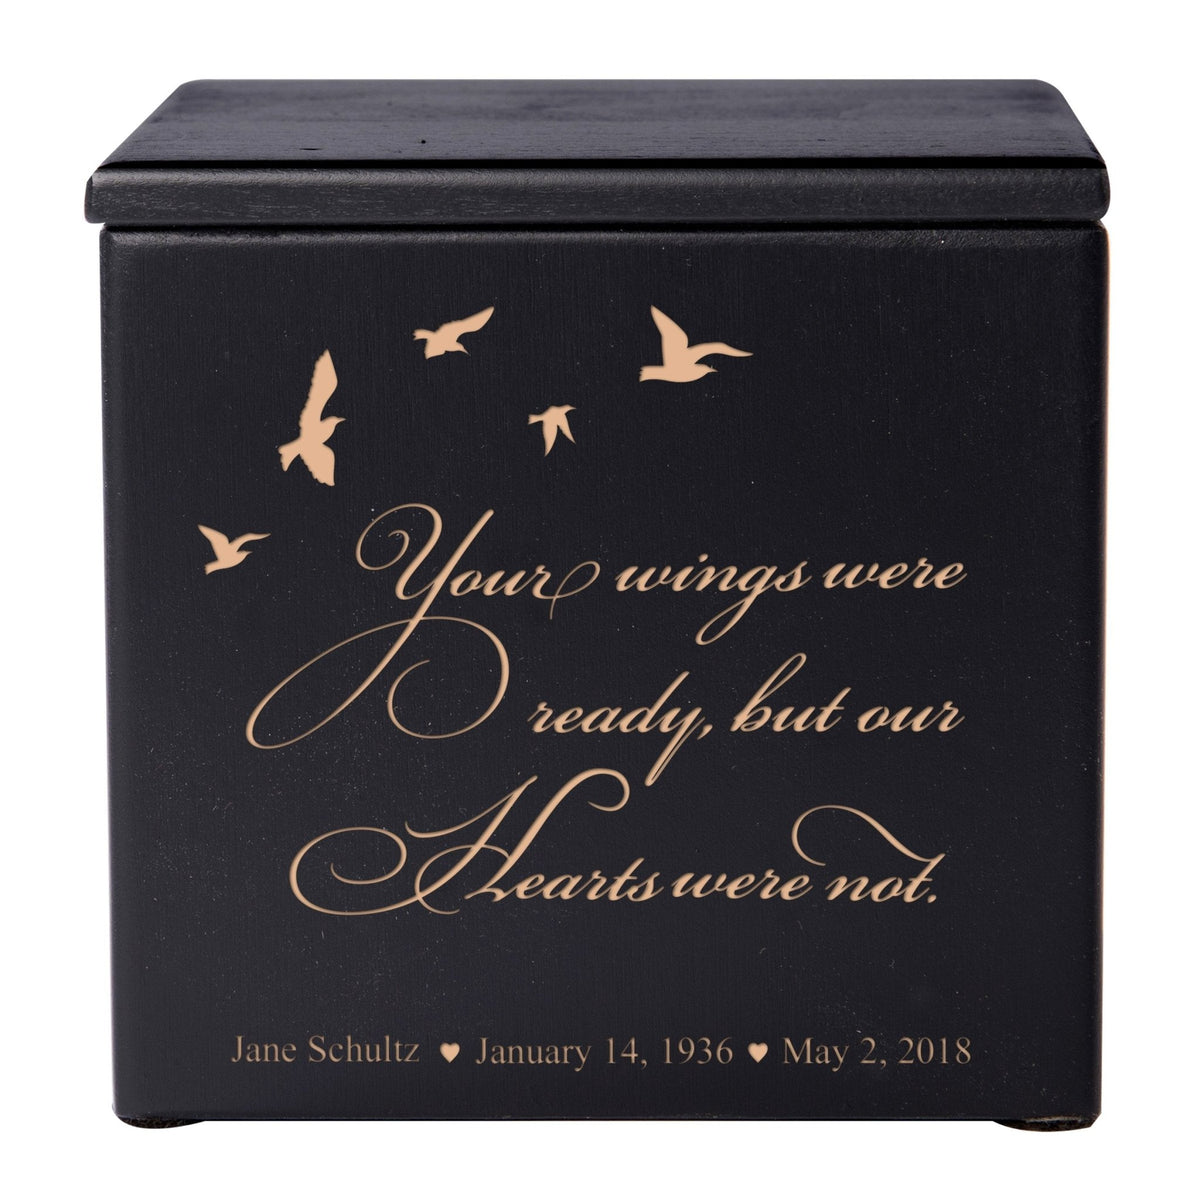 Custom Wooden Cremation Urn for Human Ashes holds 49 cu in Your Wings Were Ready - LifeSong Milestones